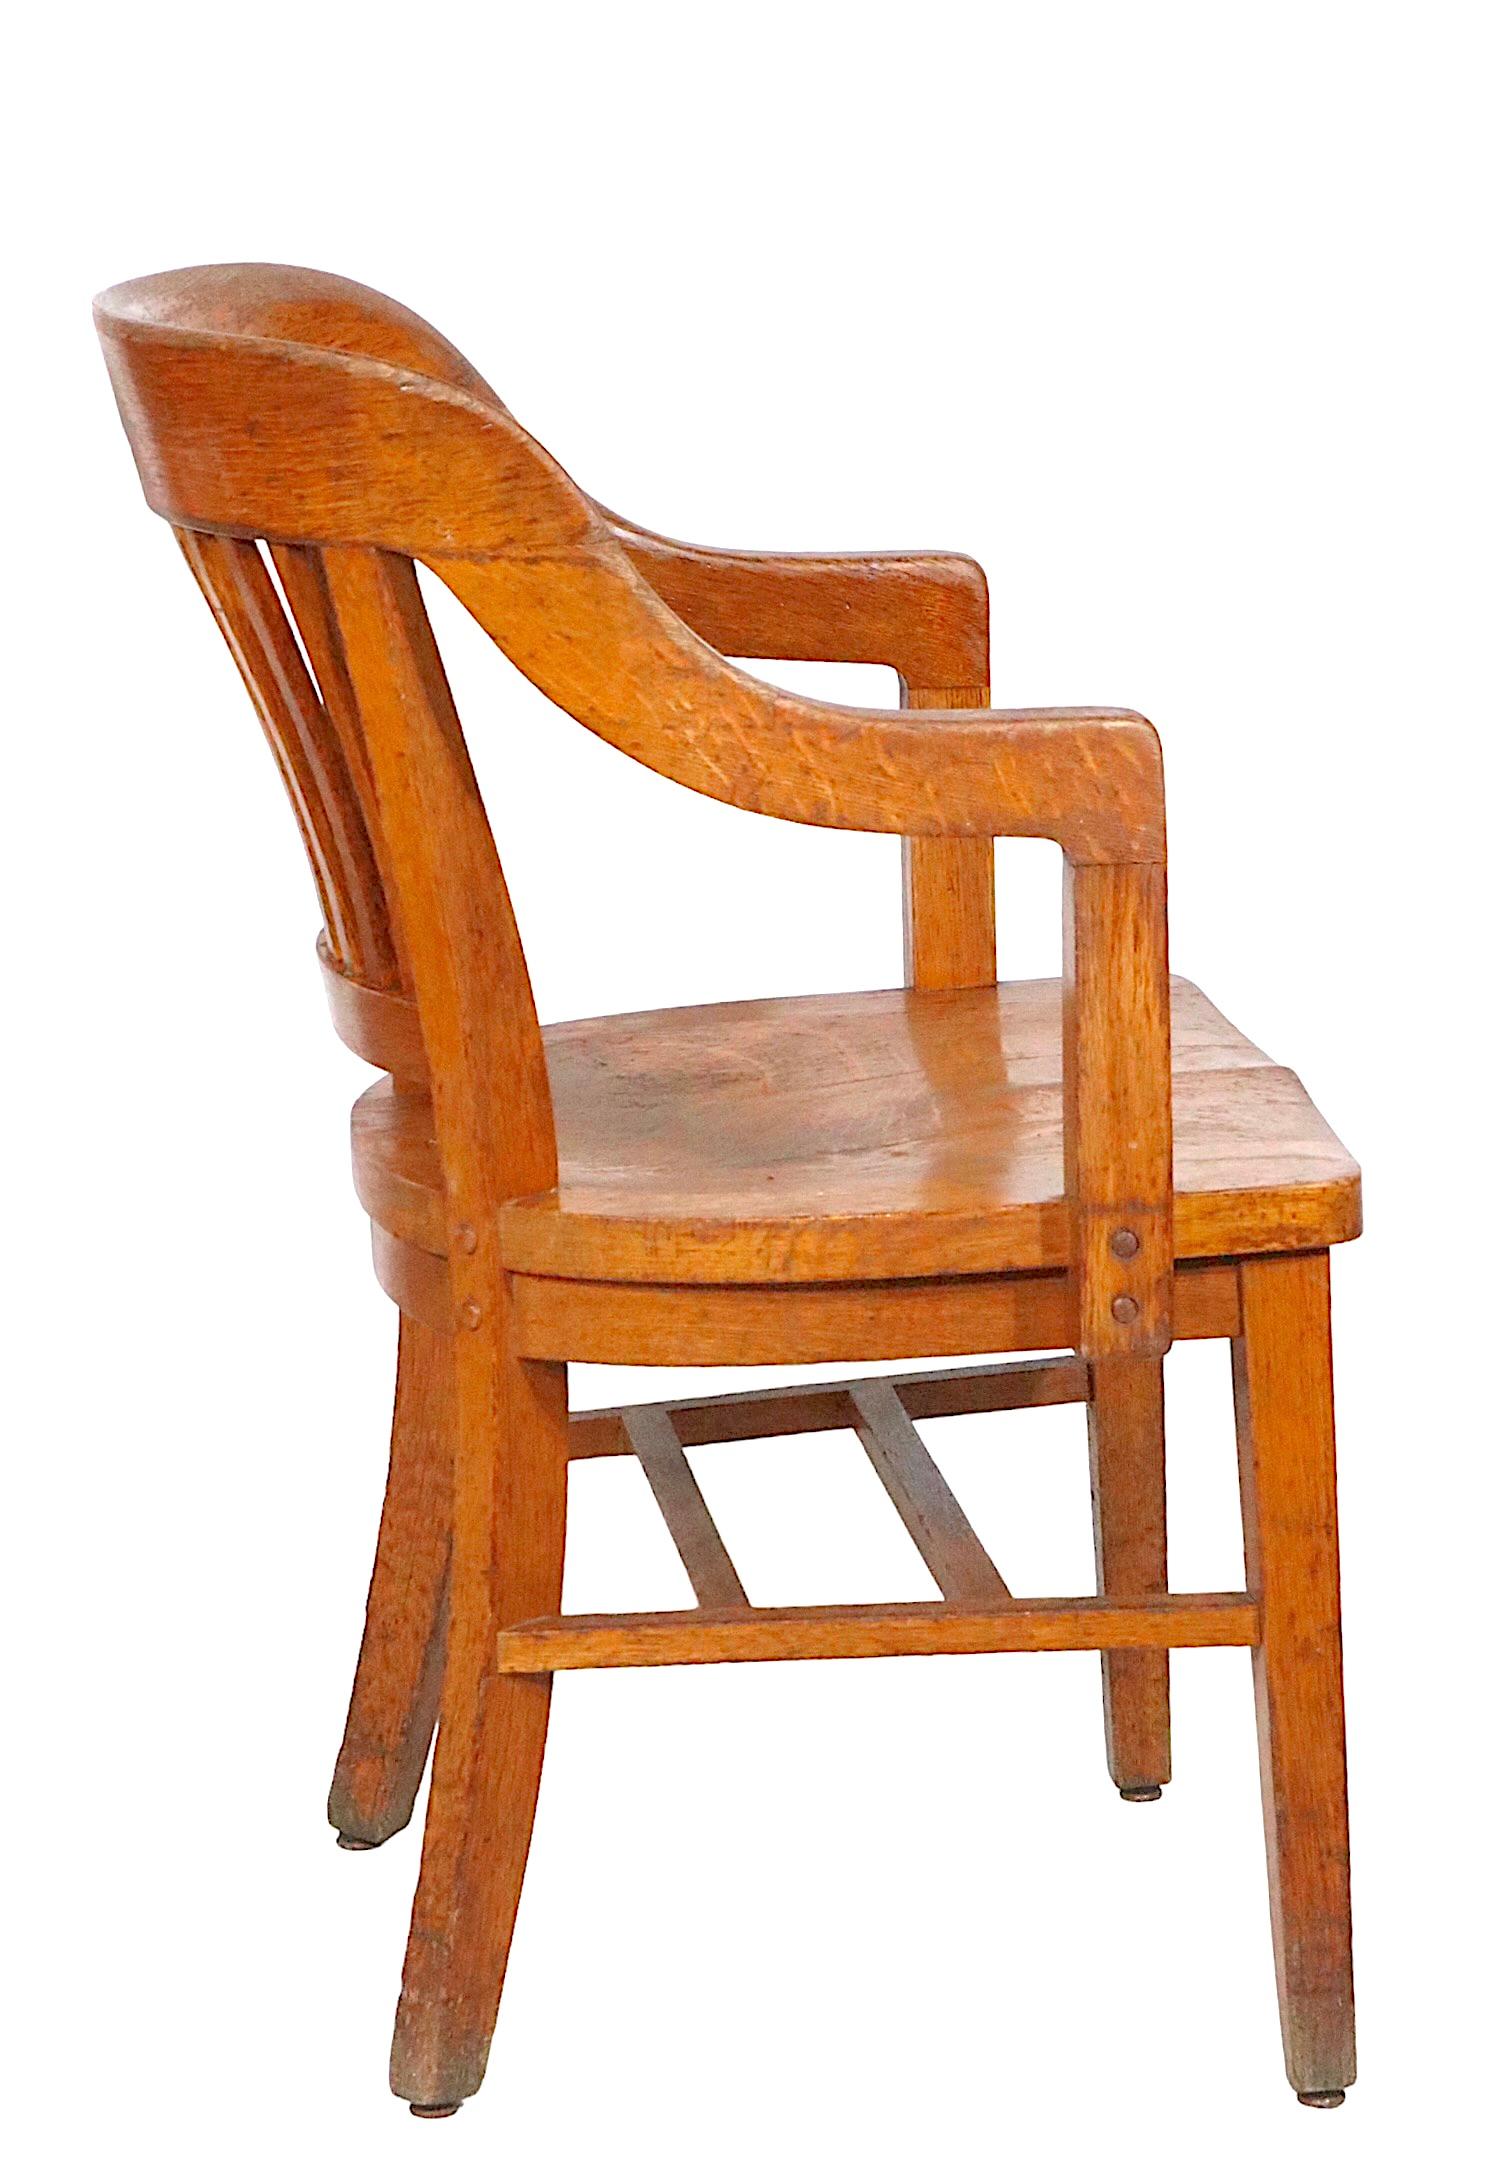 Classic pair of Gunlocke Jury, Bankers, Bank of England chairs in solid oak. Great architectural design, stylish and timeless - The chairs are in good condition, sturdy and ready to use. Condition report as follows.
 One chair shows repairs,